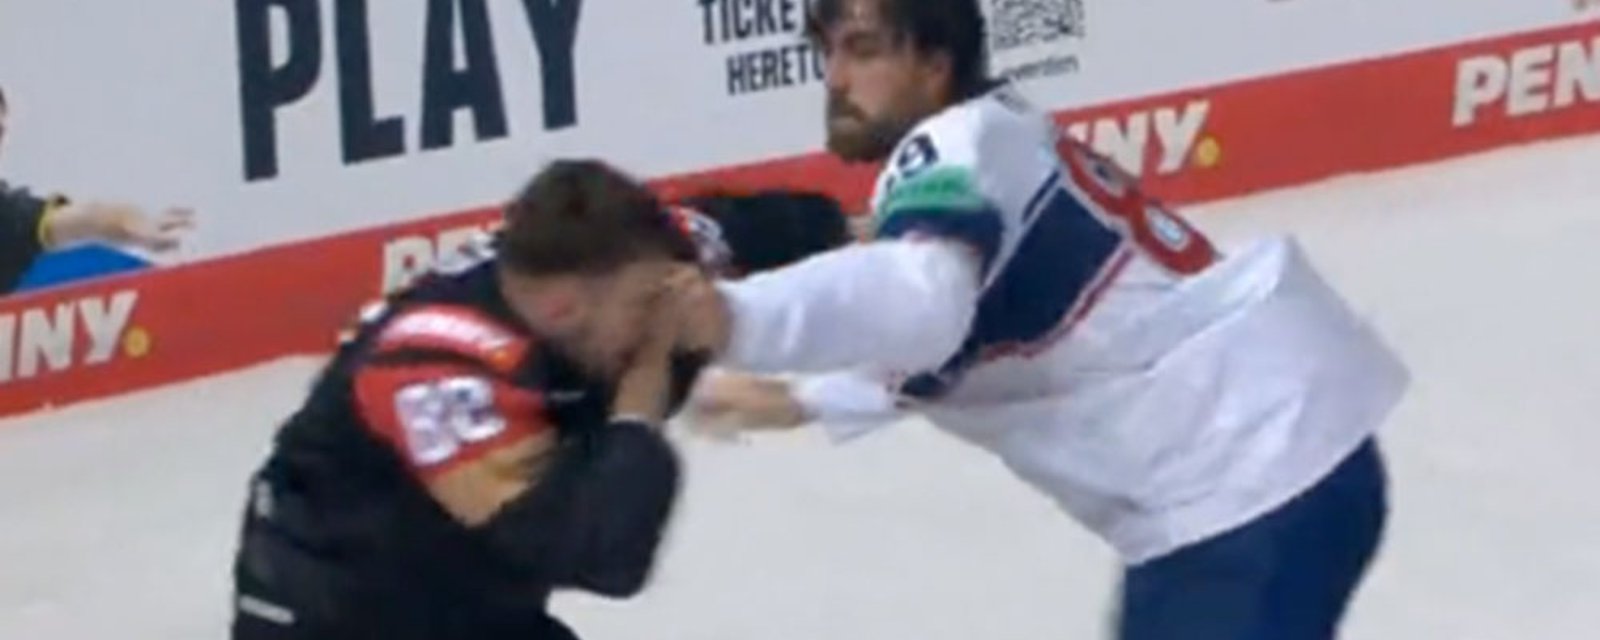 Alex Tuch beats the wheels off German player in World Championship exhibition